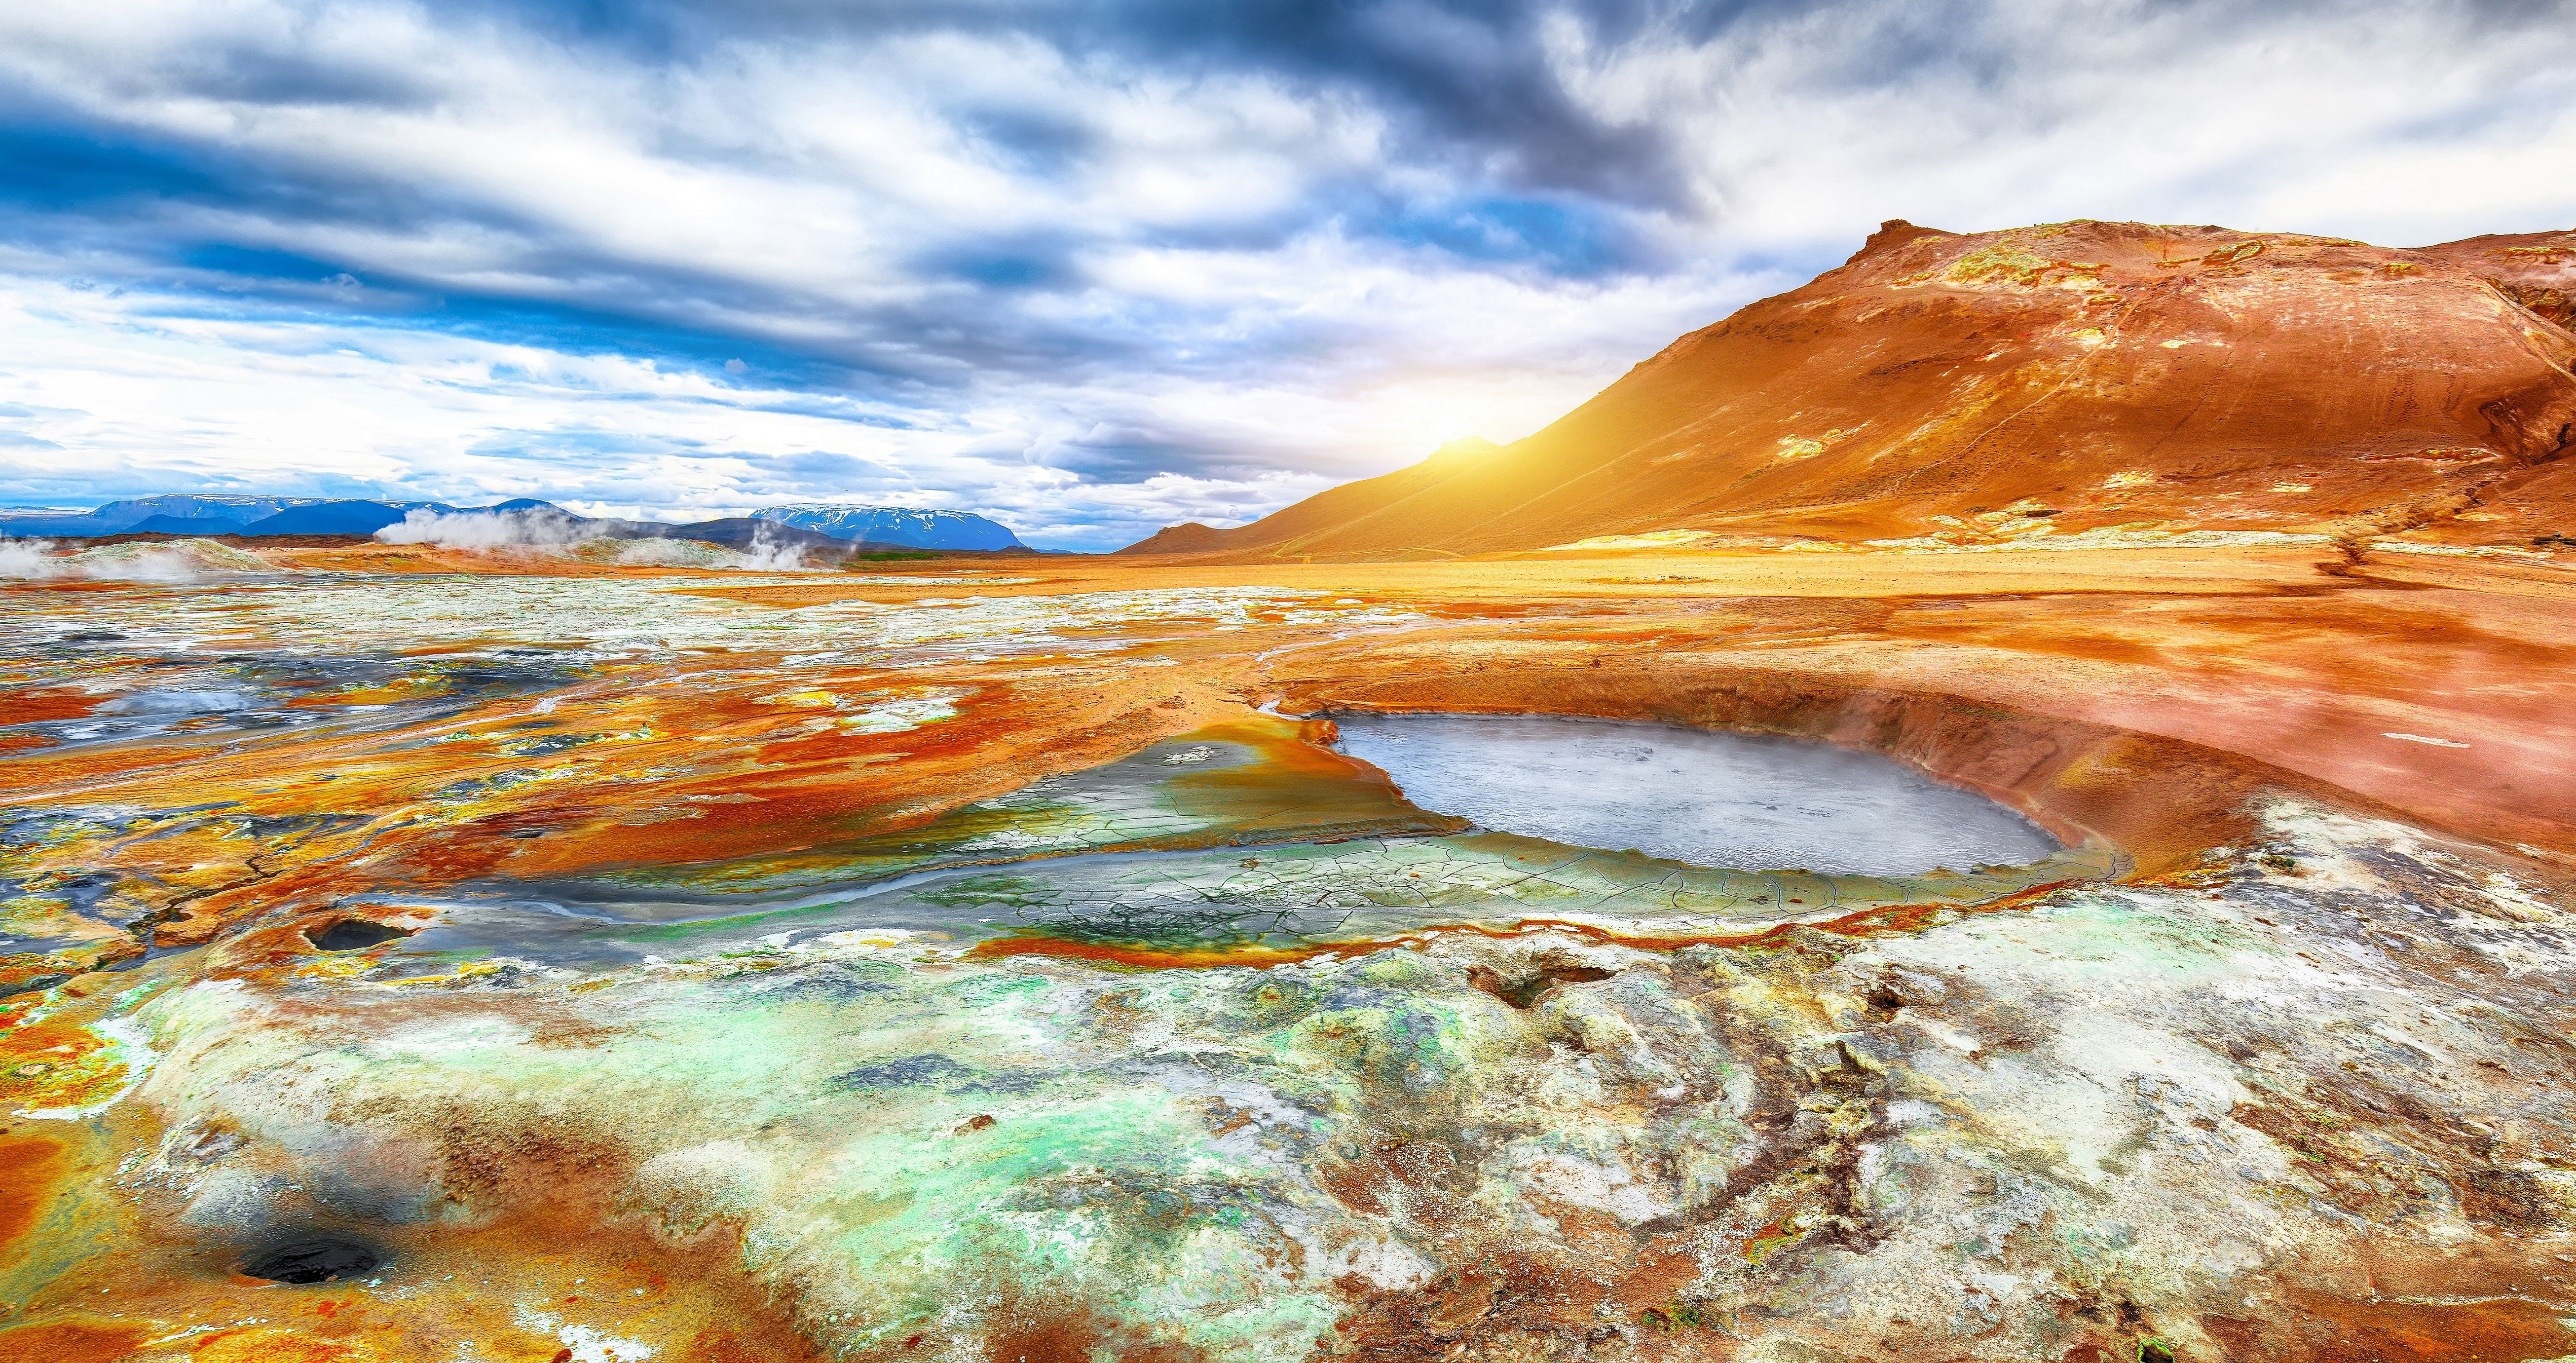 Boiling mudpots in Hverir, Iceland, Europe, Arctic